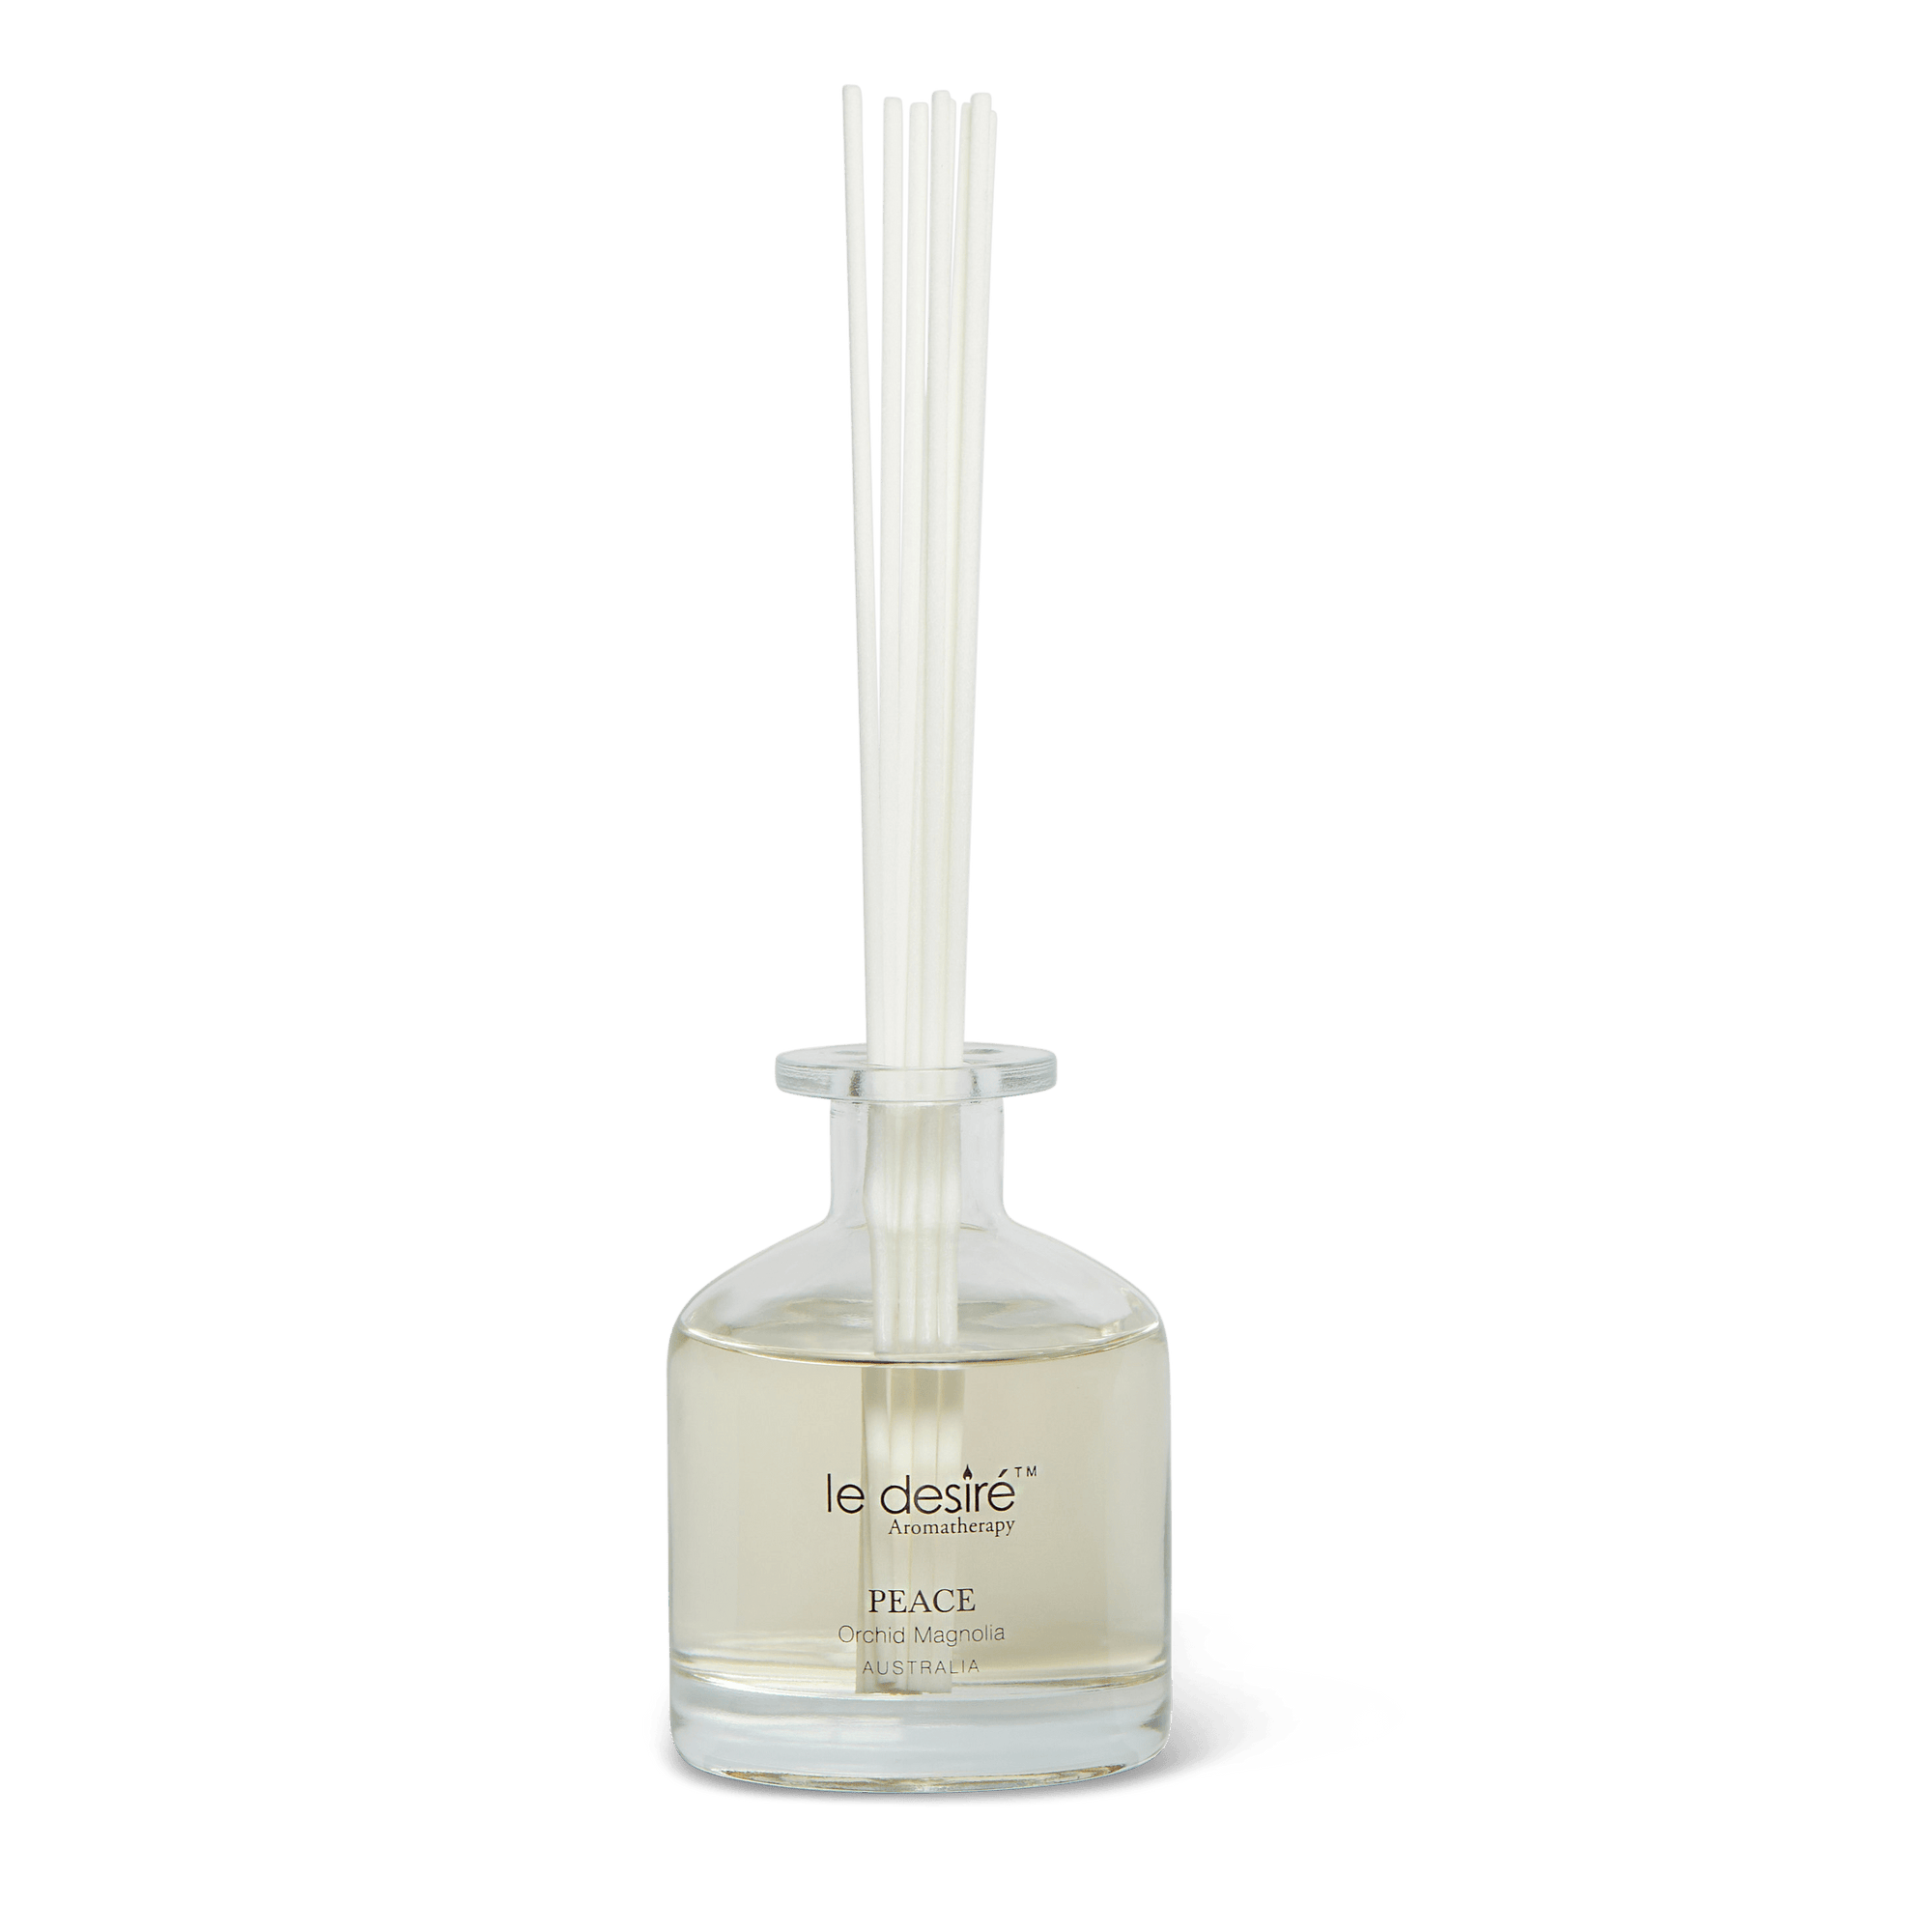 Peace (Orchid Magnolia) - Aromatherapy Reed Diffuser